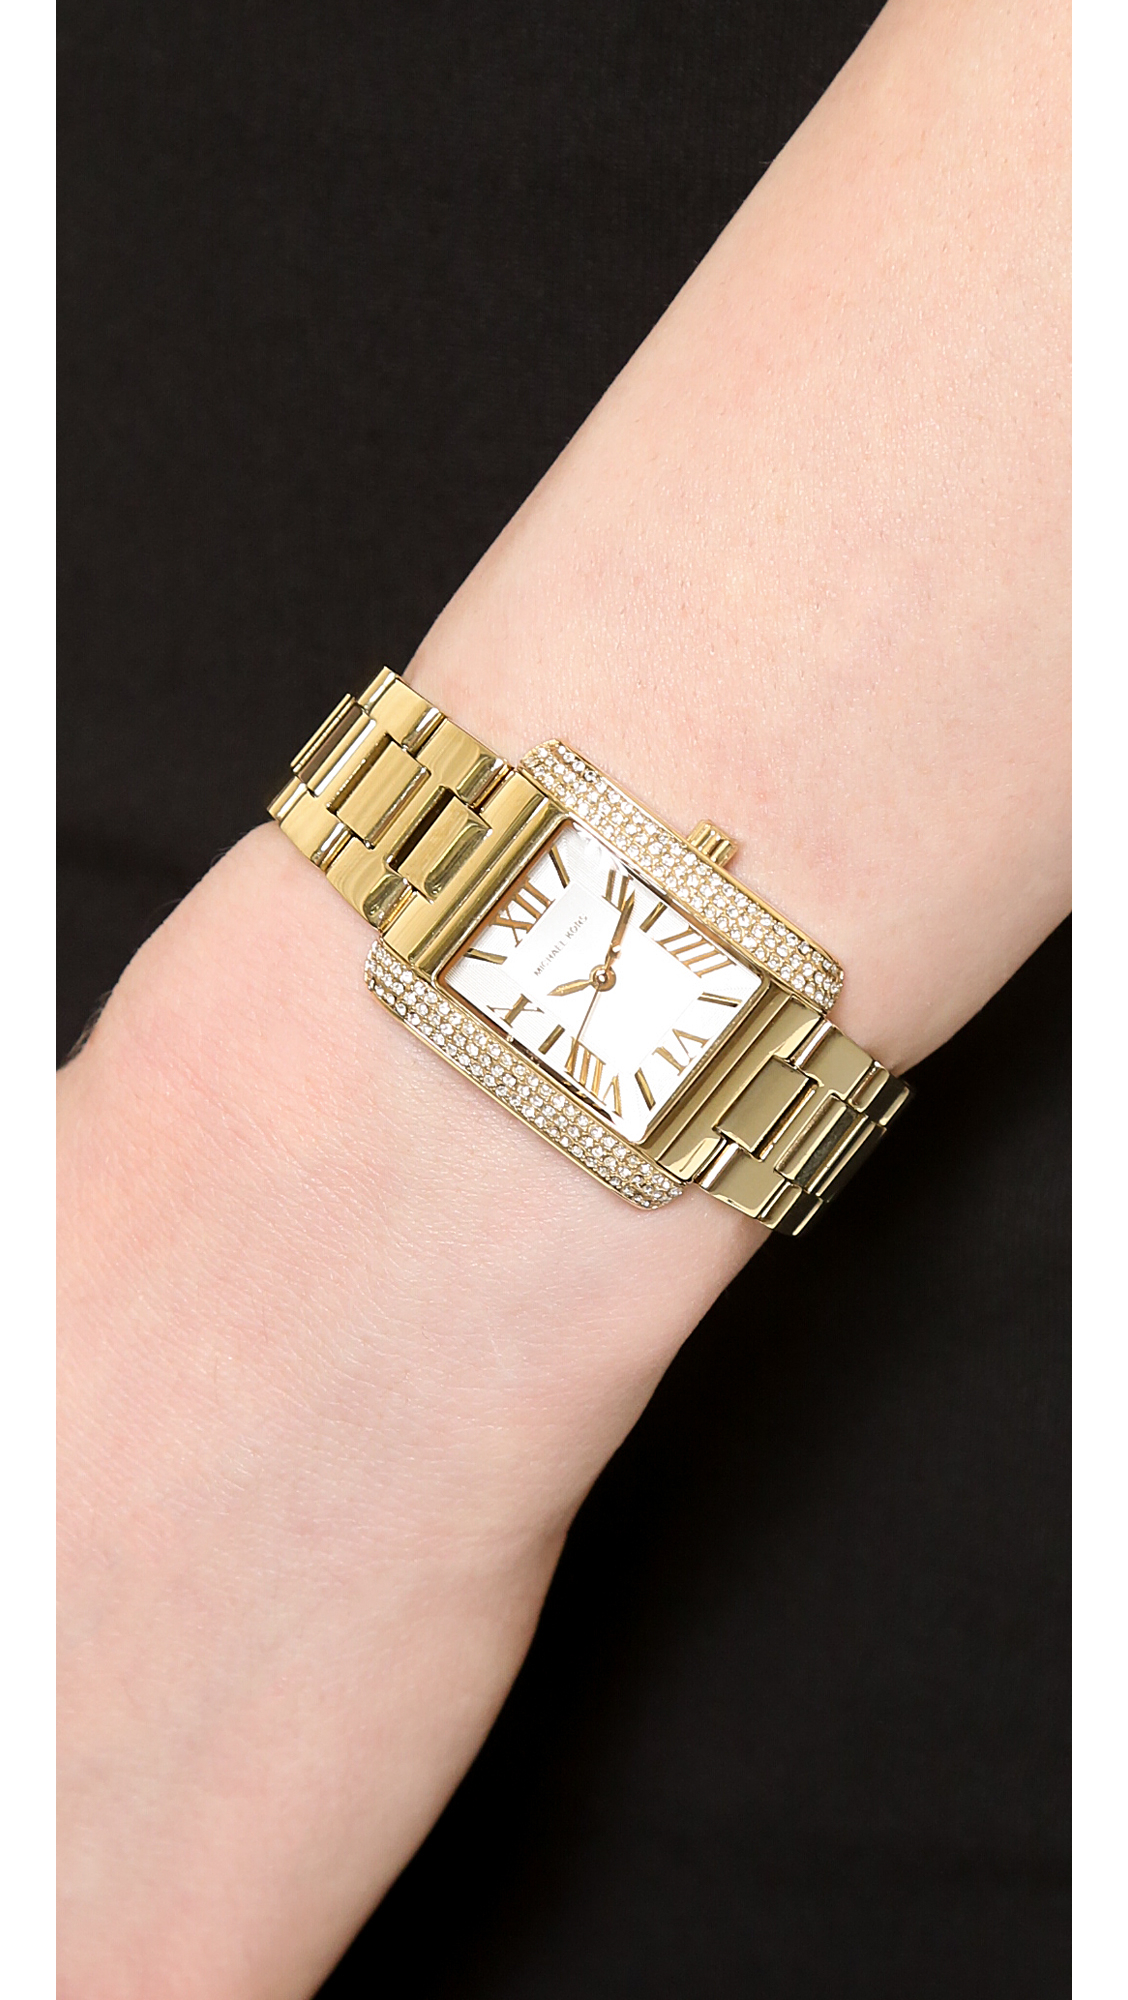 silver and gold mk watch